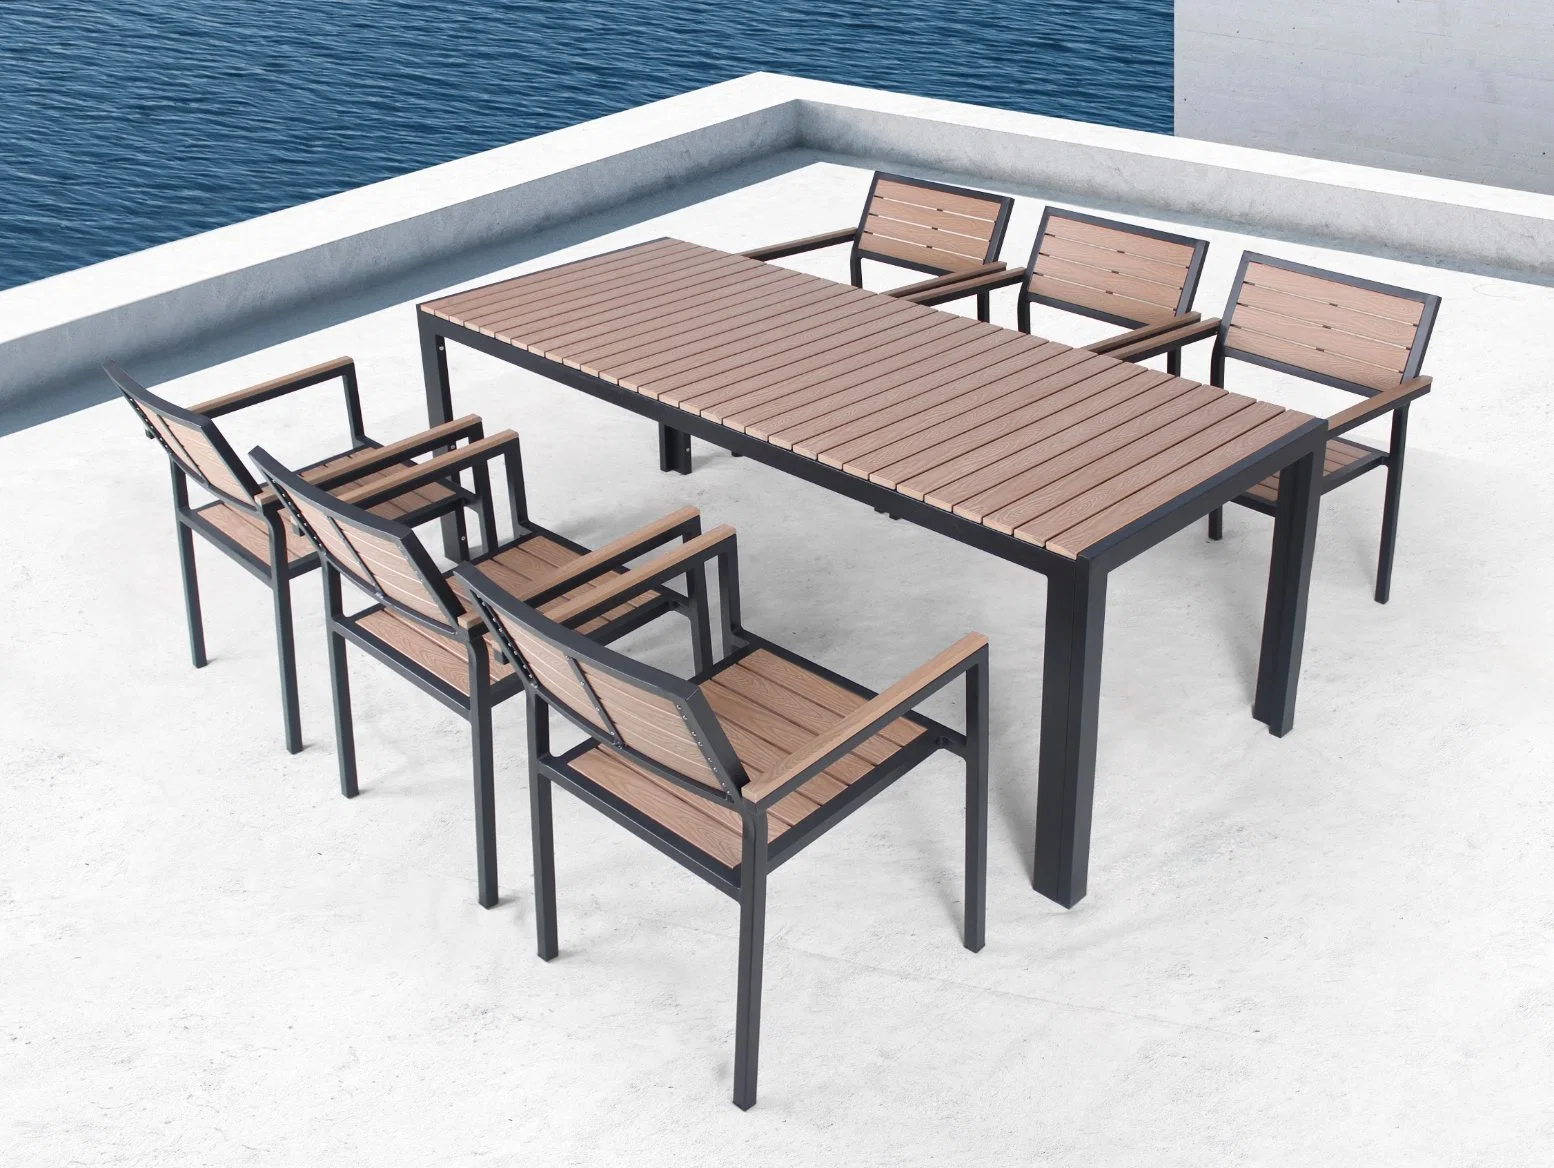 Outdoor Restaurant 7 Pieces Plastic Wood Table Chairs Garden Furniture Dining Set